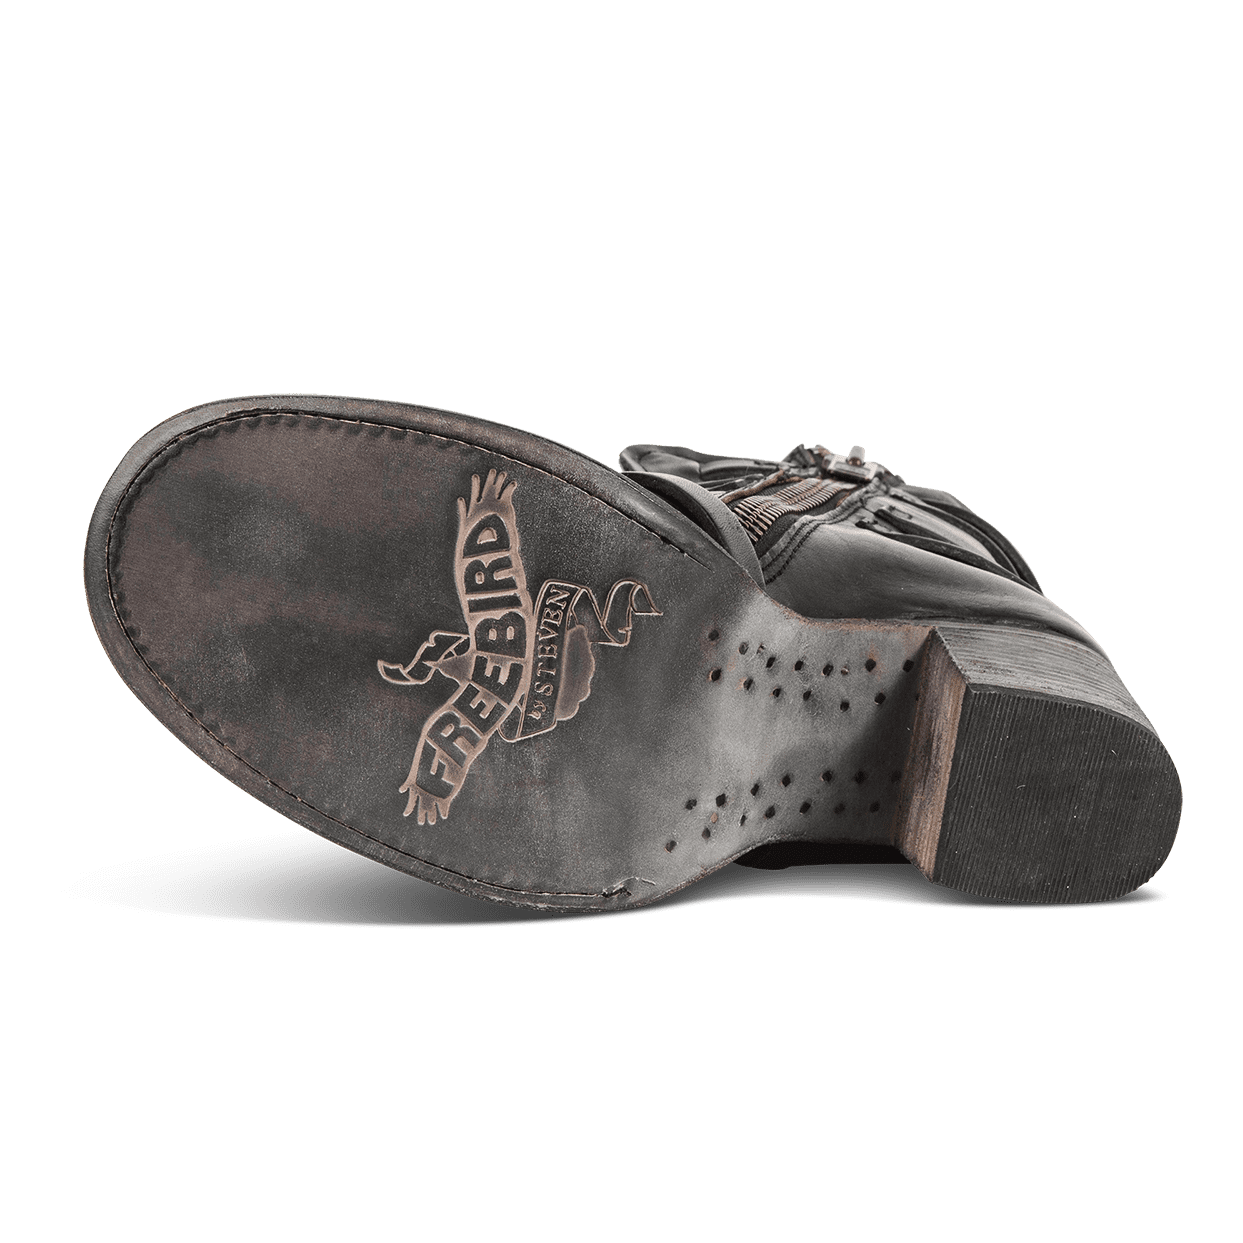 Leather sole imprinted with FREEBIRD on women's Baker black boot 